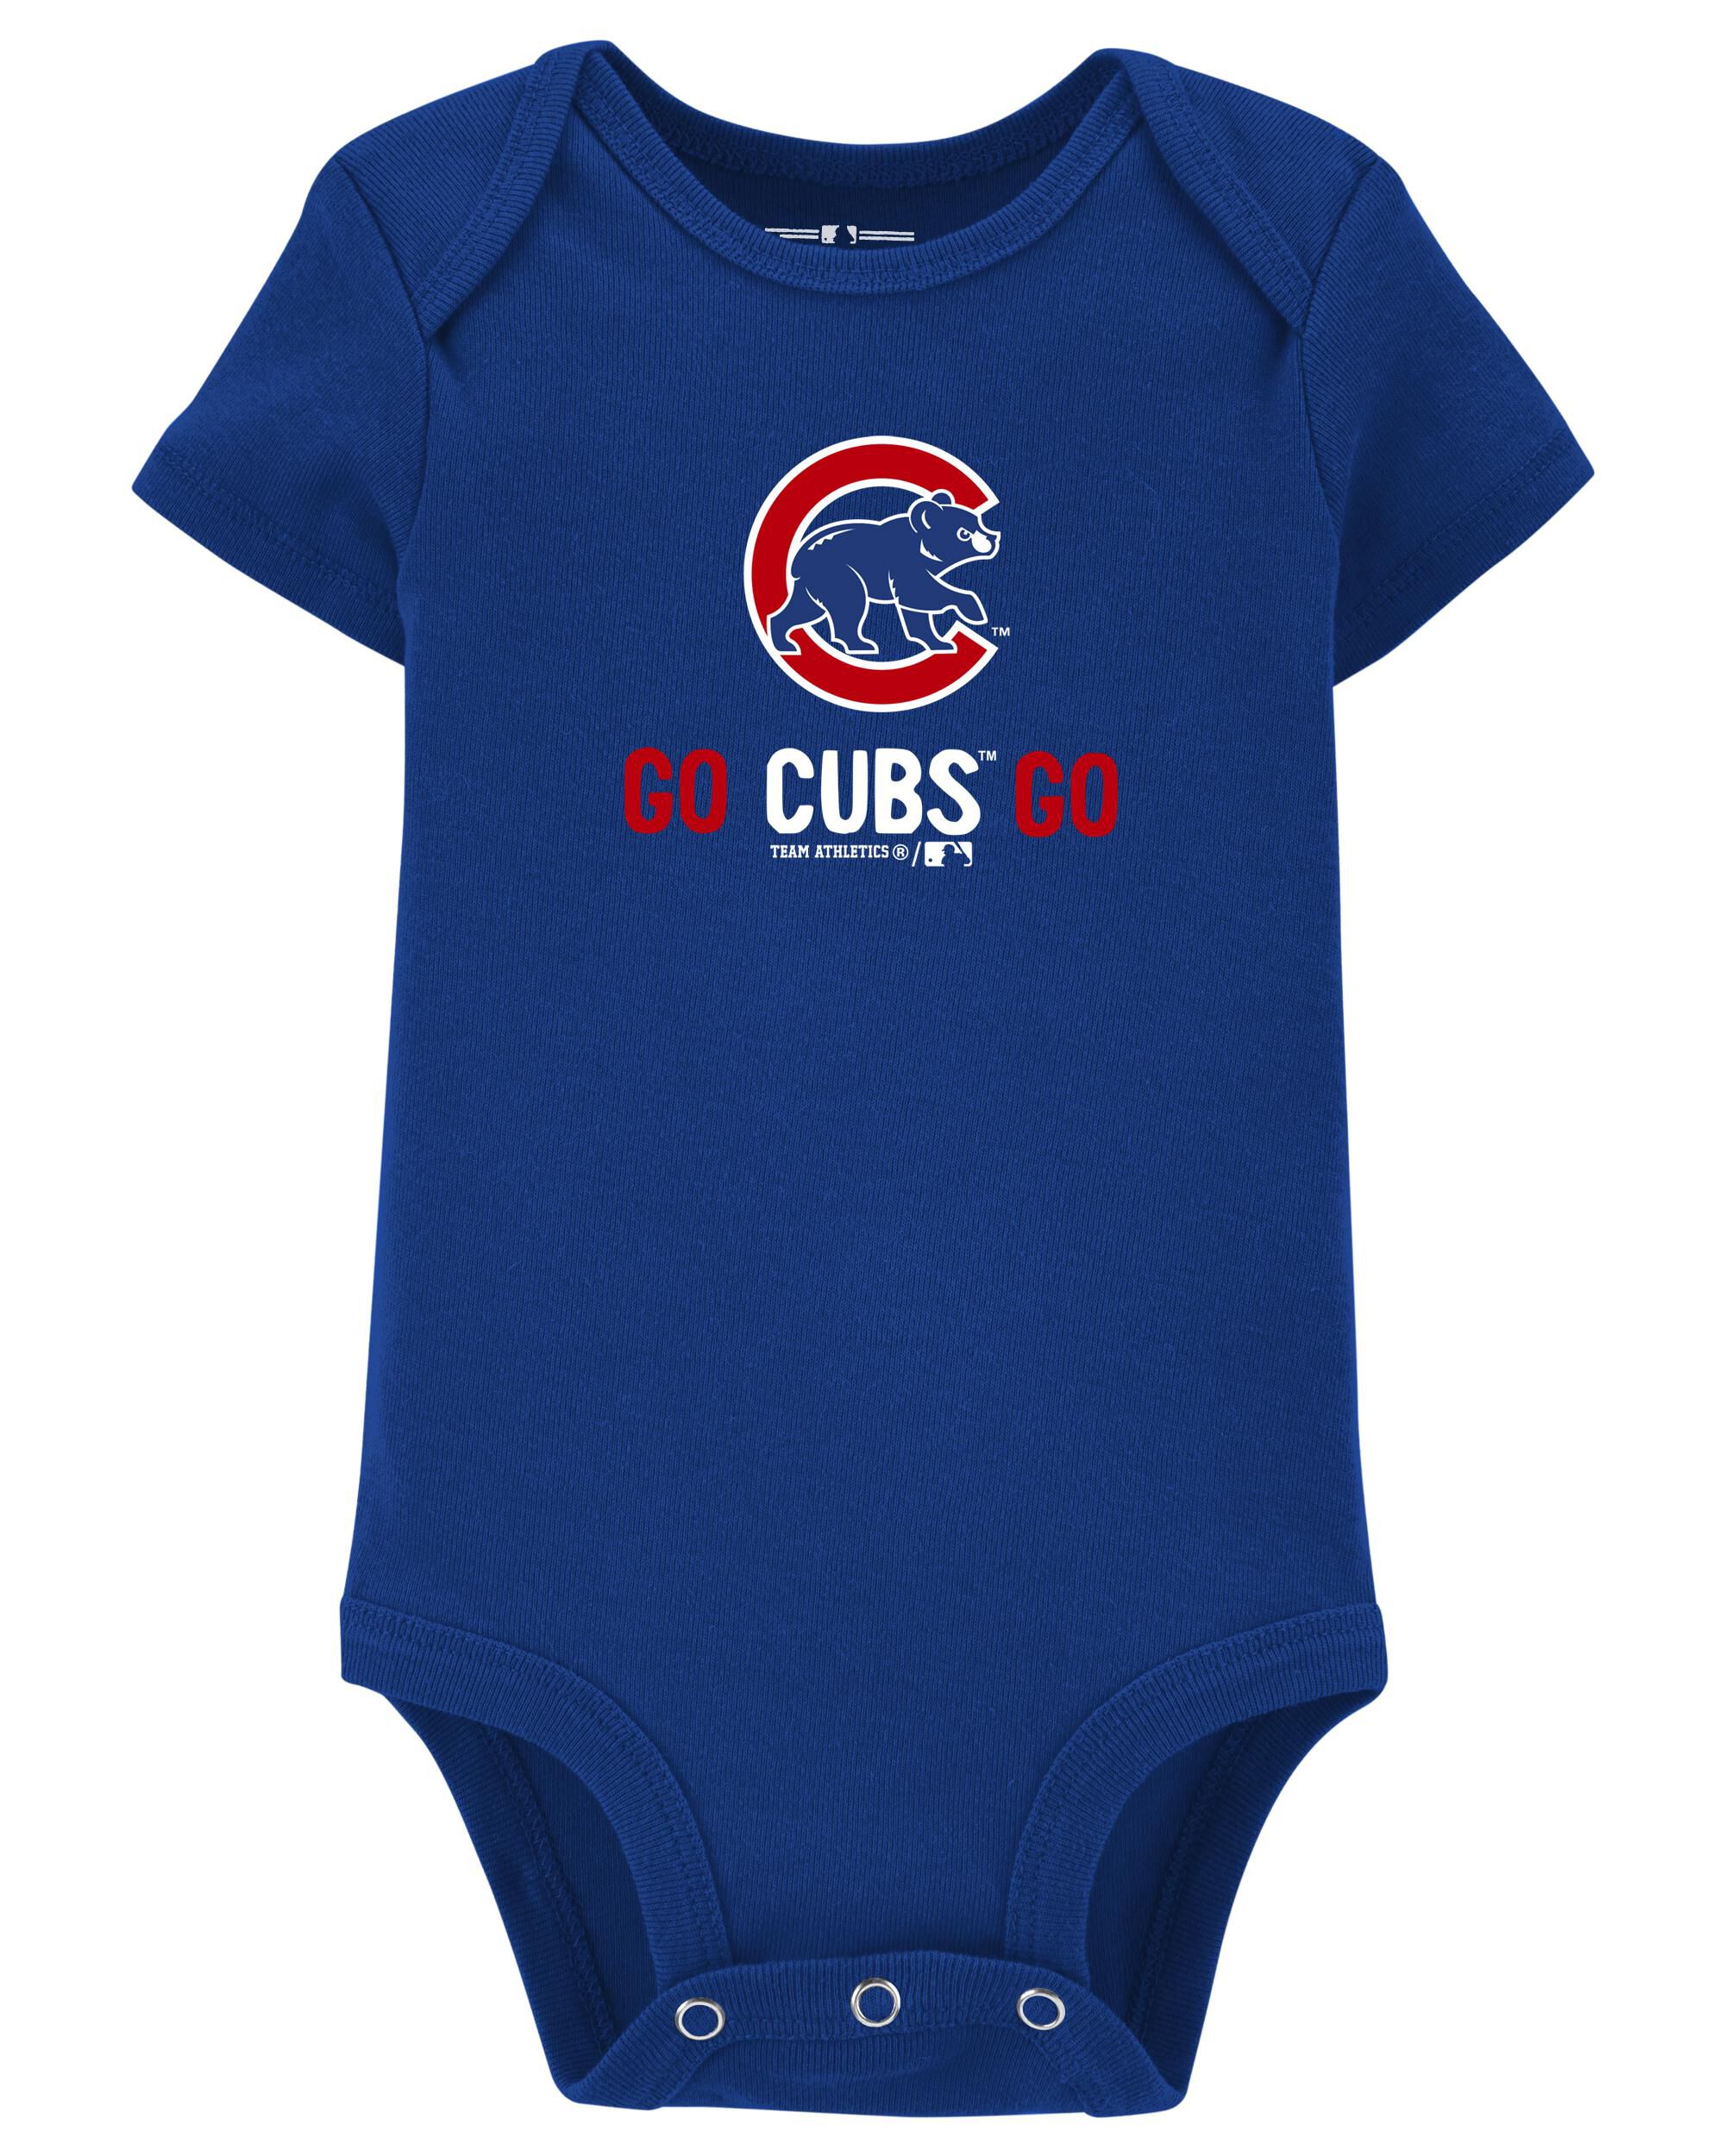 Chicago Cubs Baseball Baby Bodysuit Cute New Gift Choose Size & Color All Season 